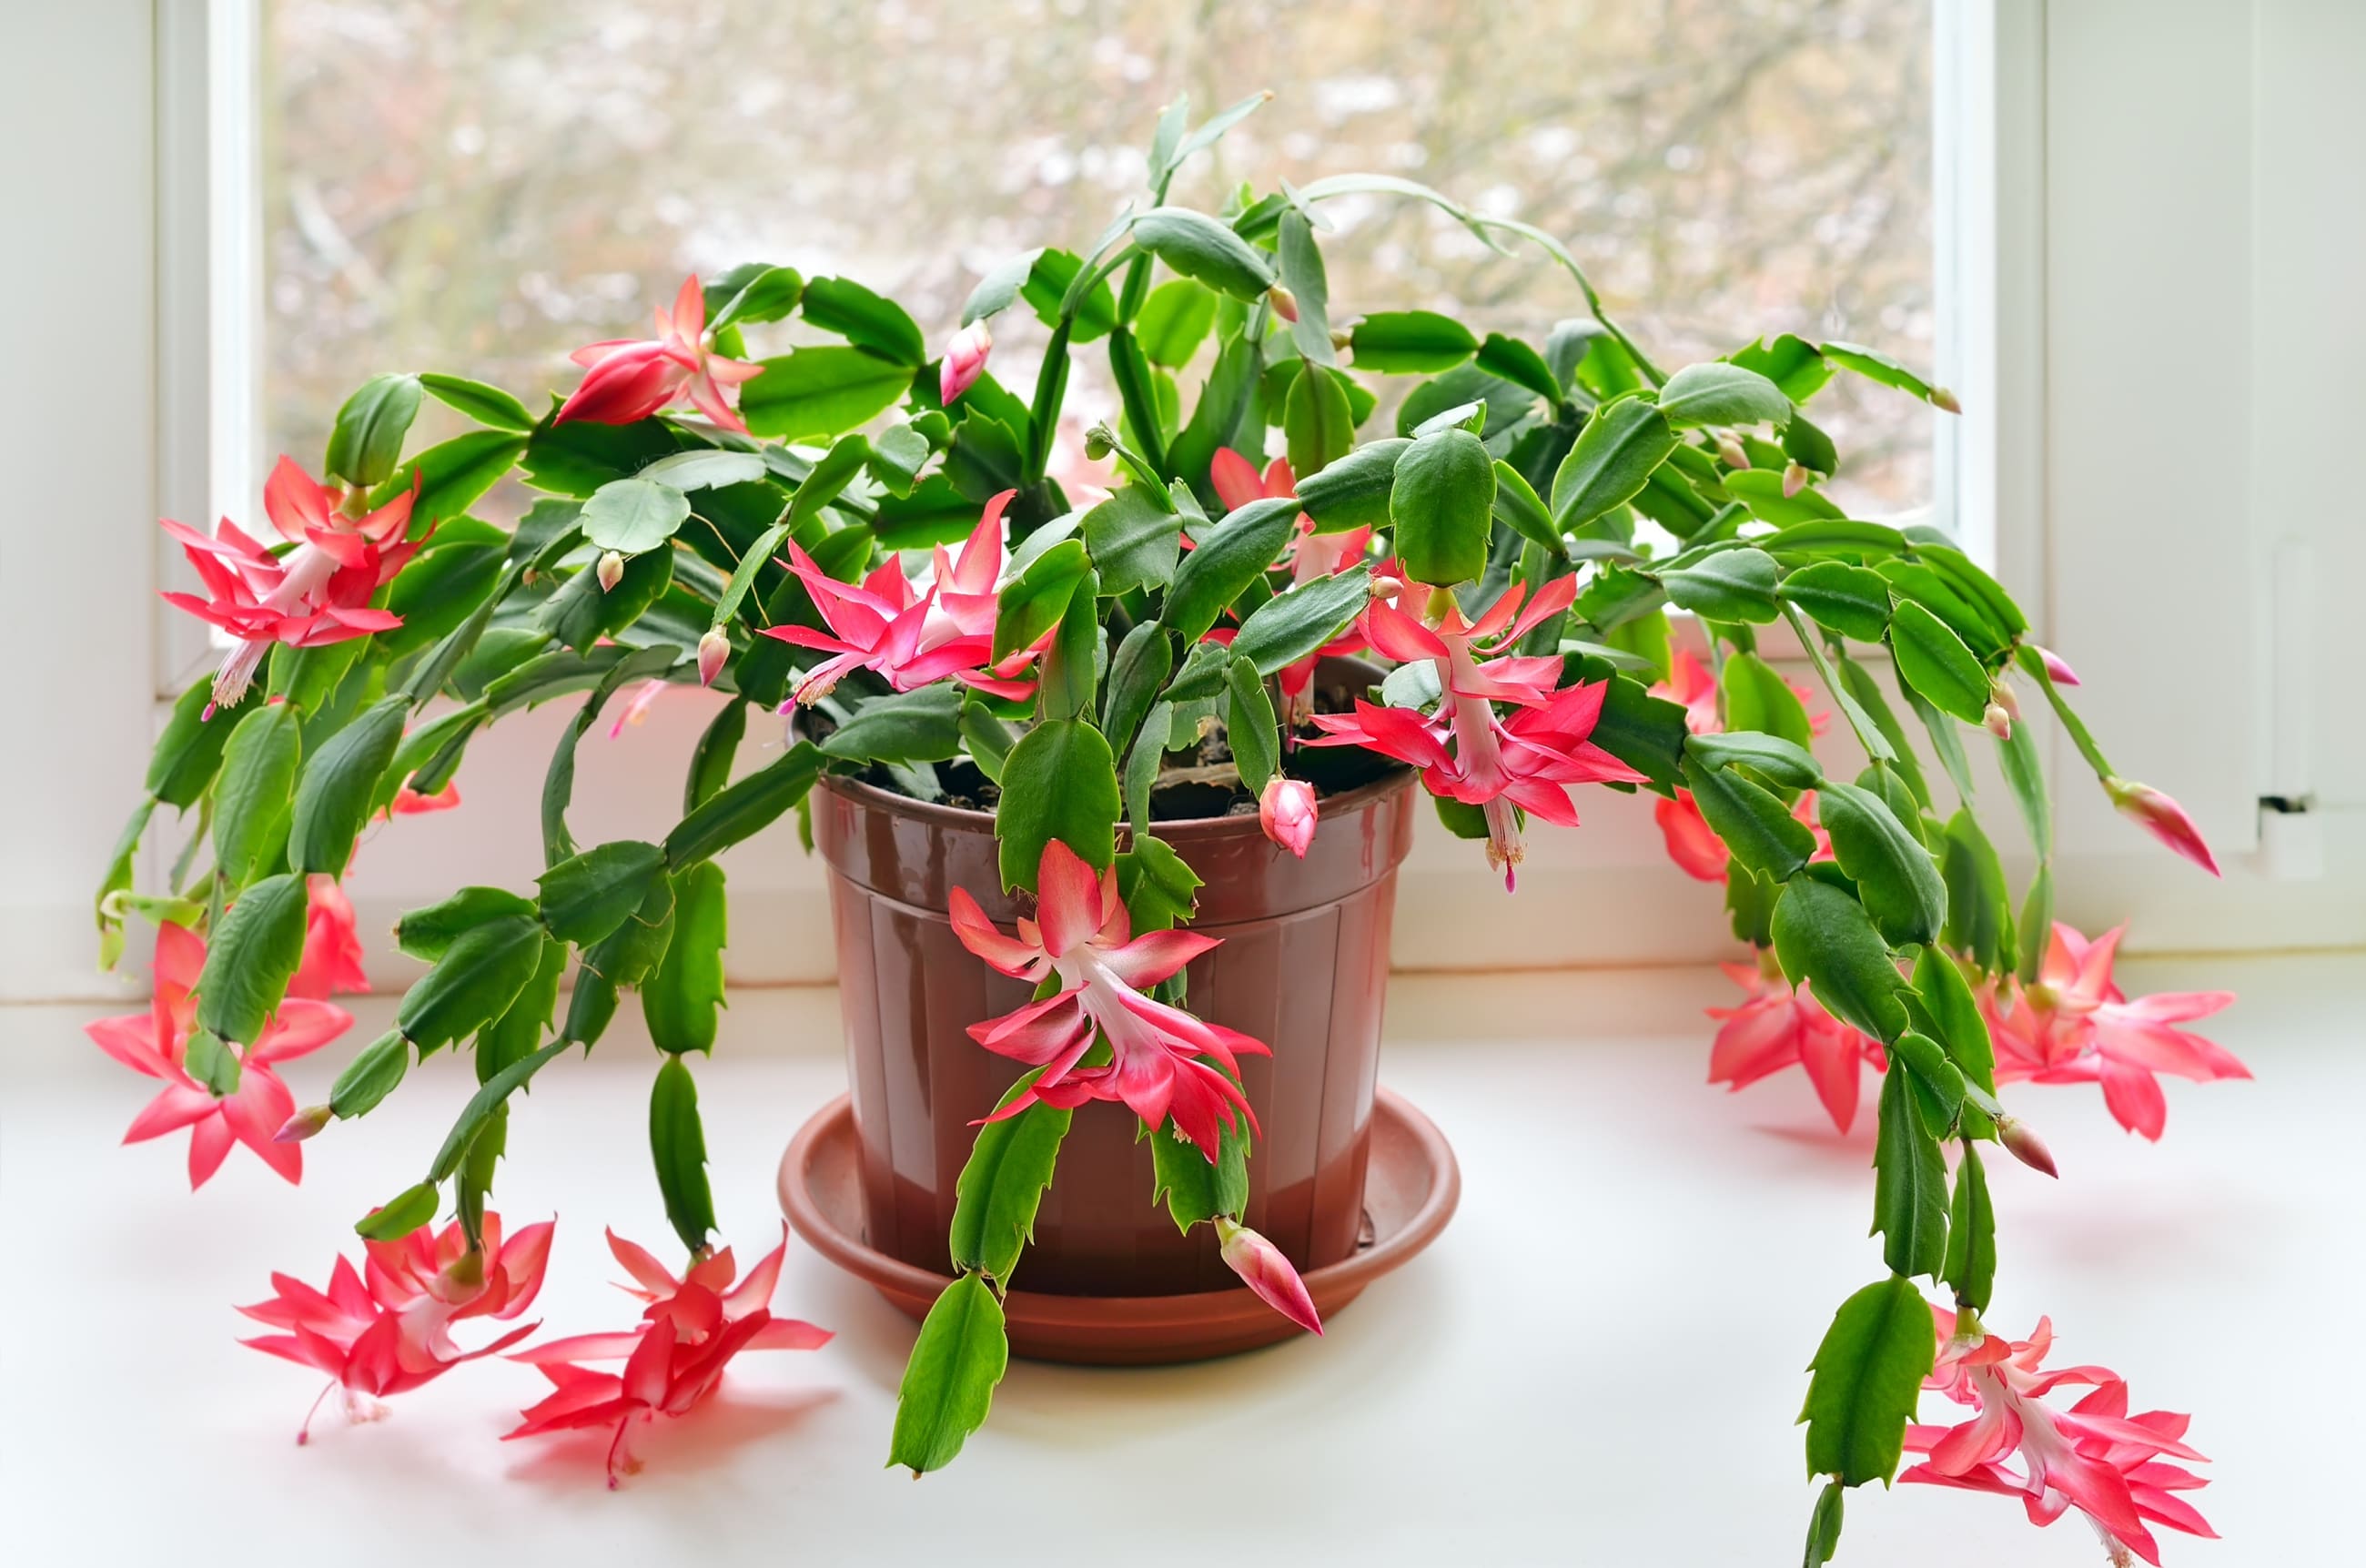 9 colors of indoor plants that can warm your home in winter - 61